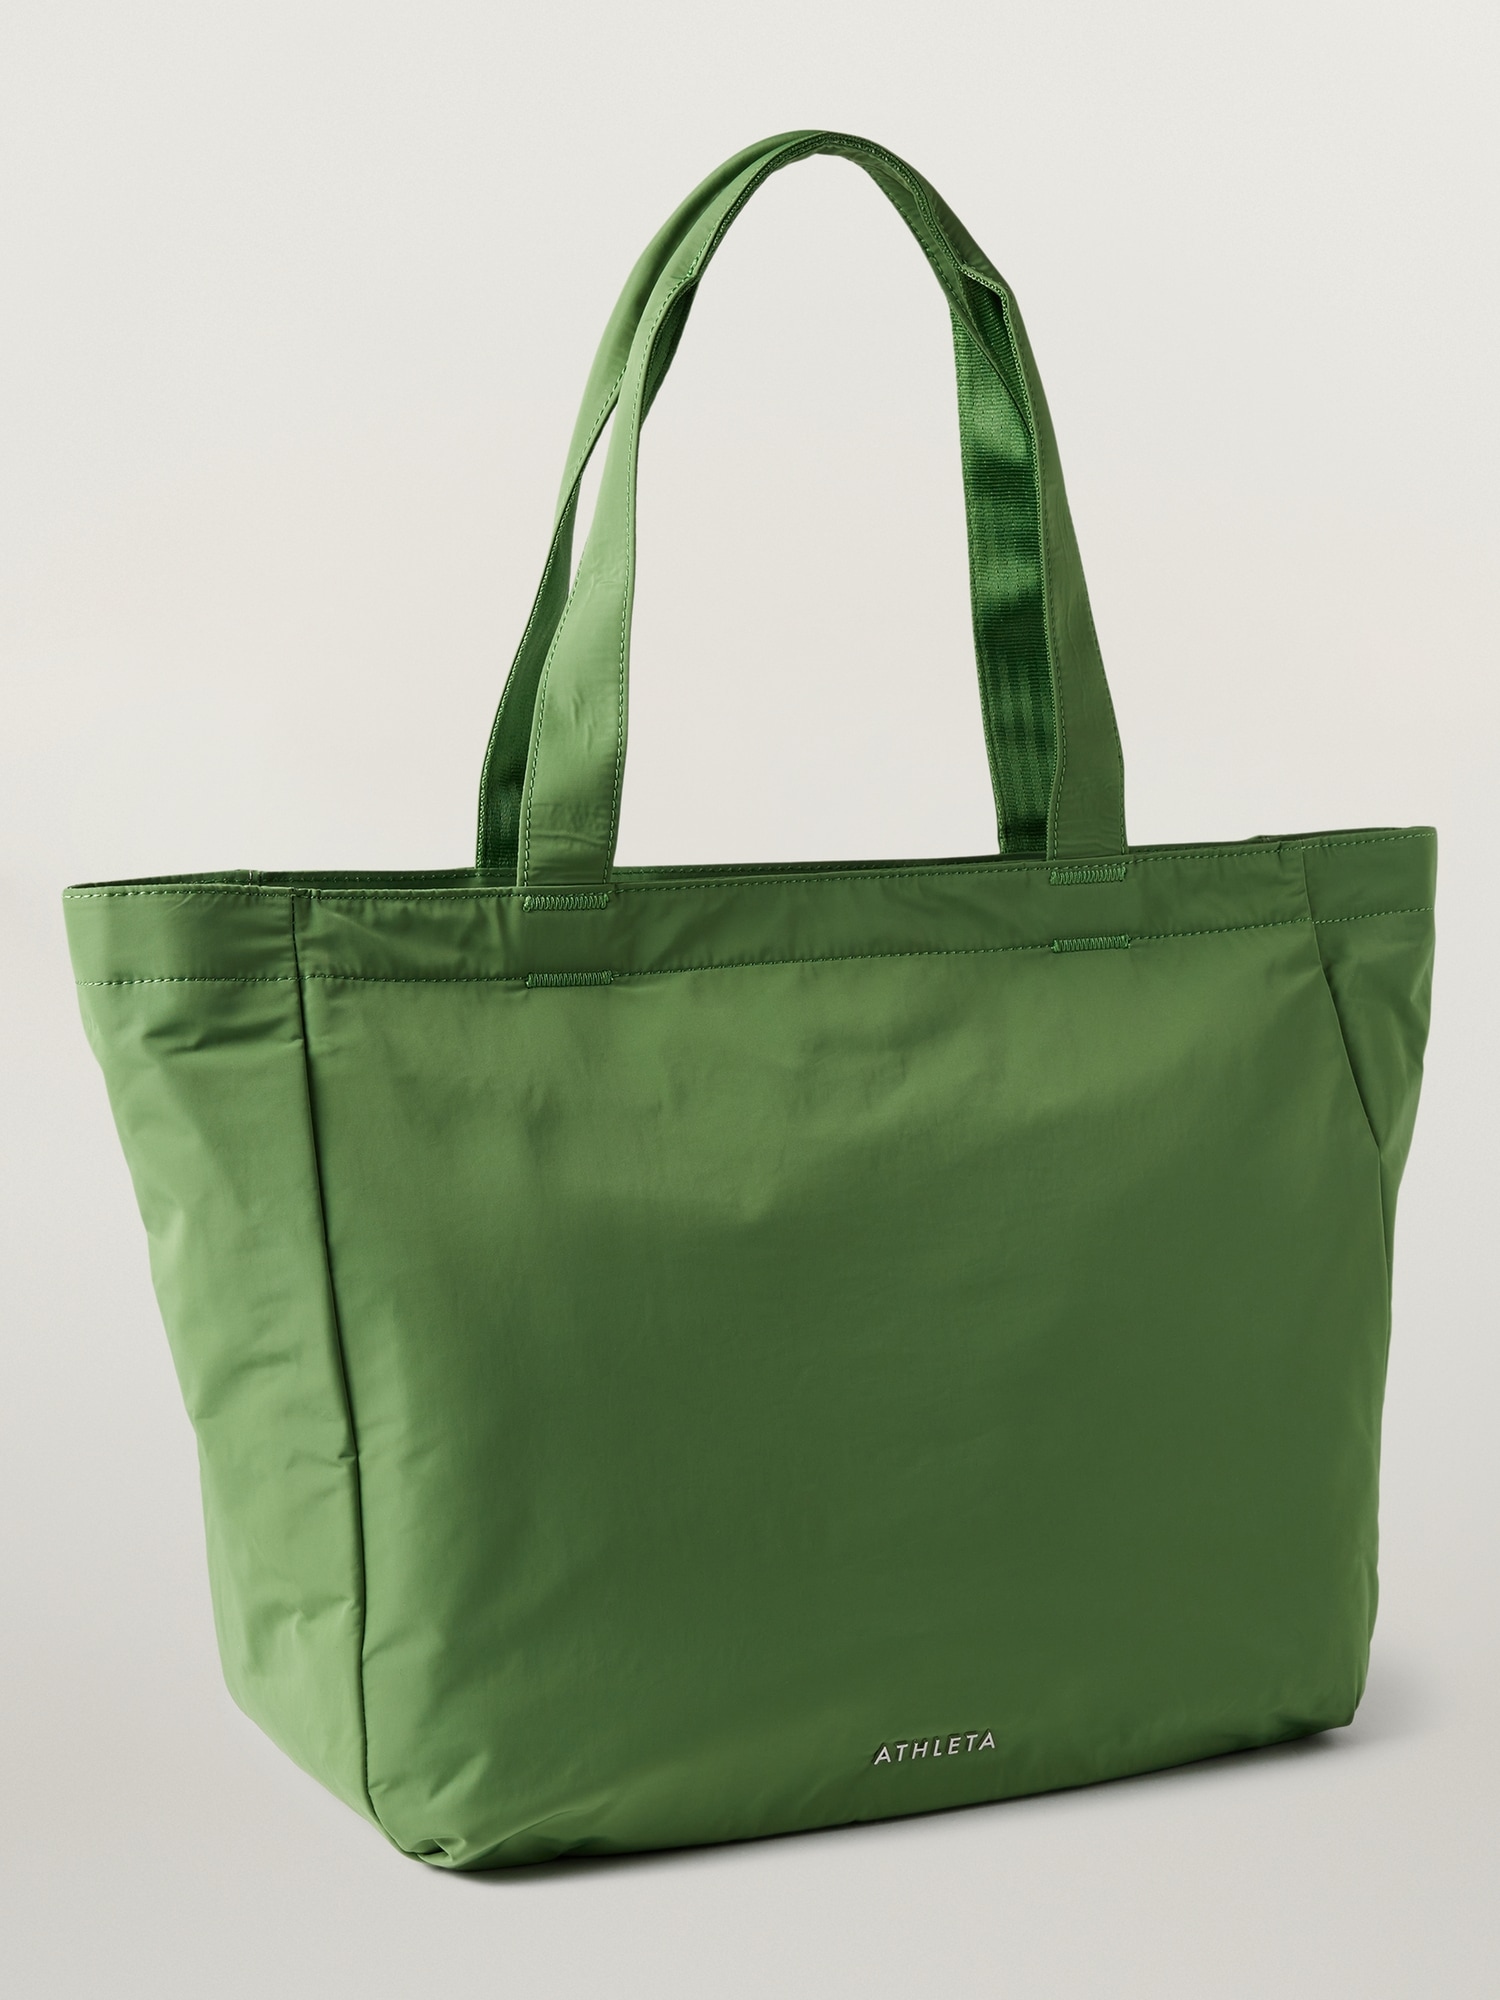 Athleta All About Tote Bag In Green